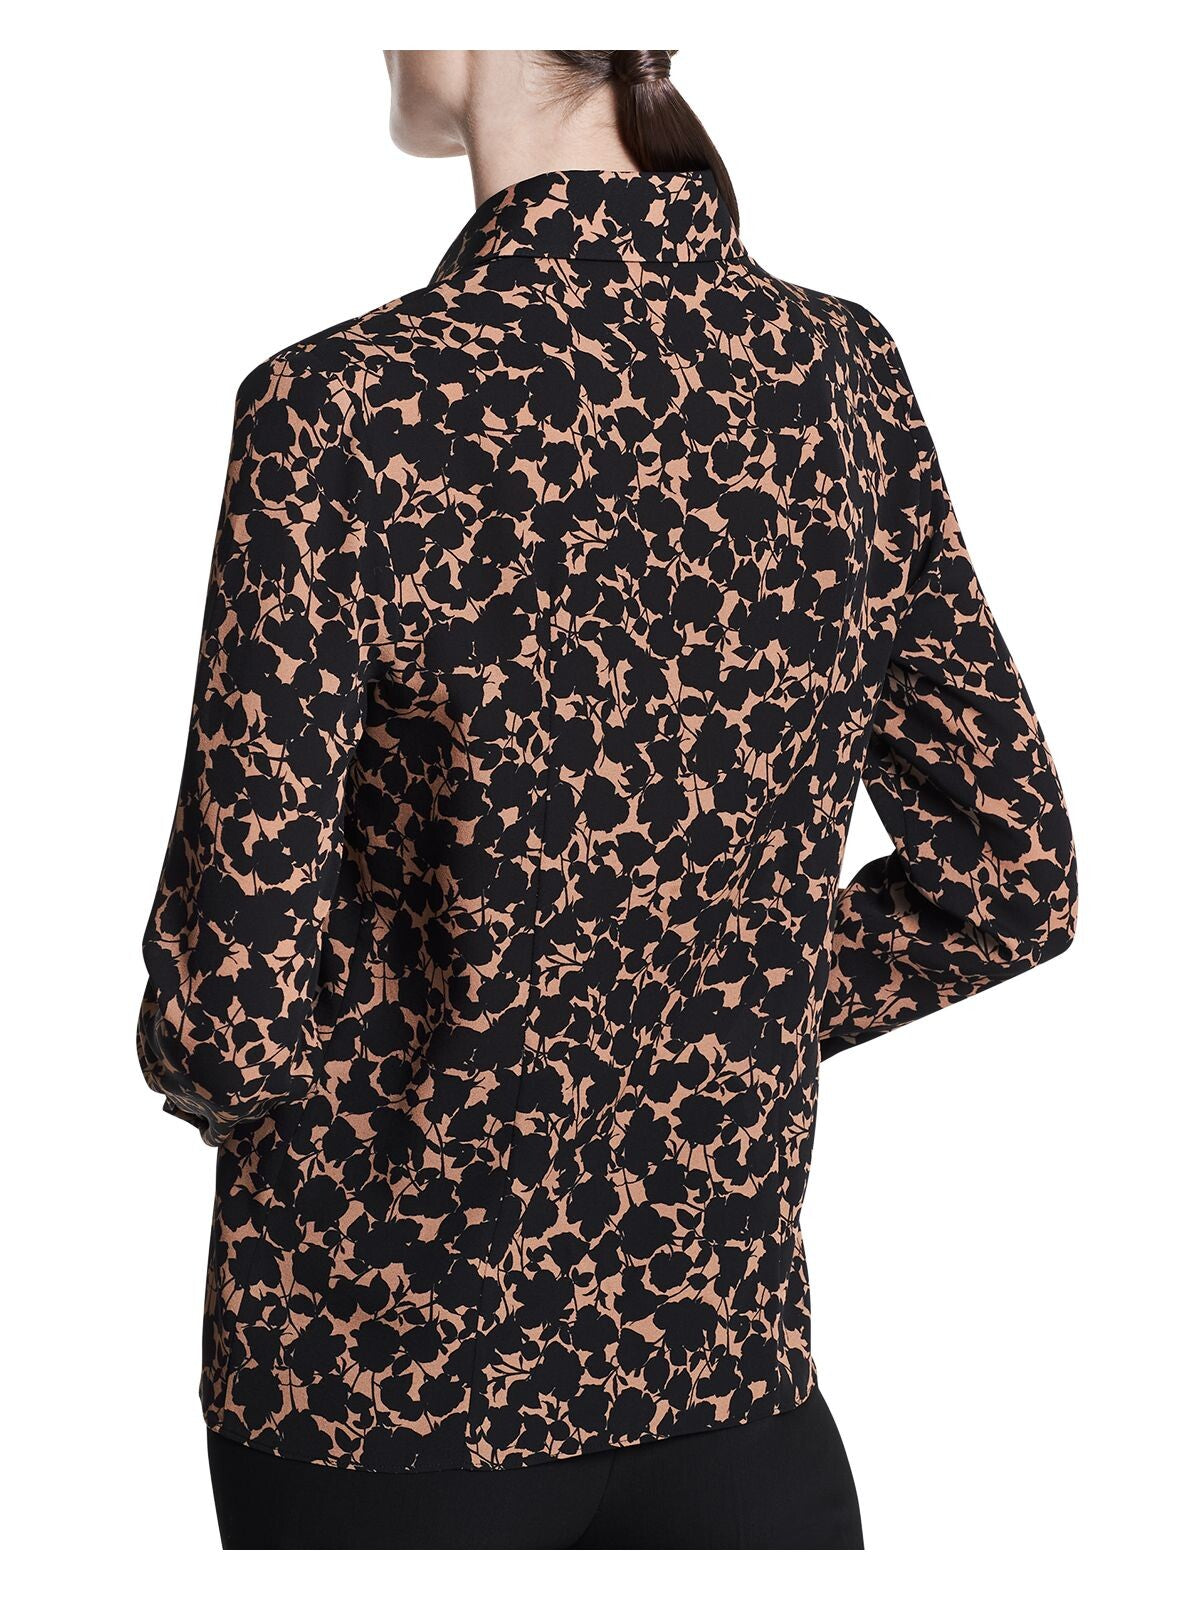 MICHAEL KORS Womens Black Darted Shirttail Hem Printed Cuffed Sleeve Collared Button Up Top 2